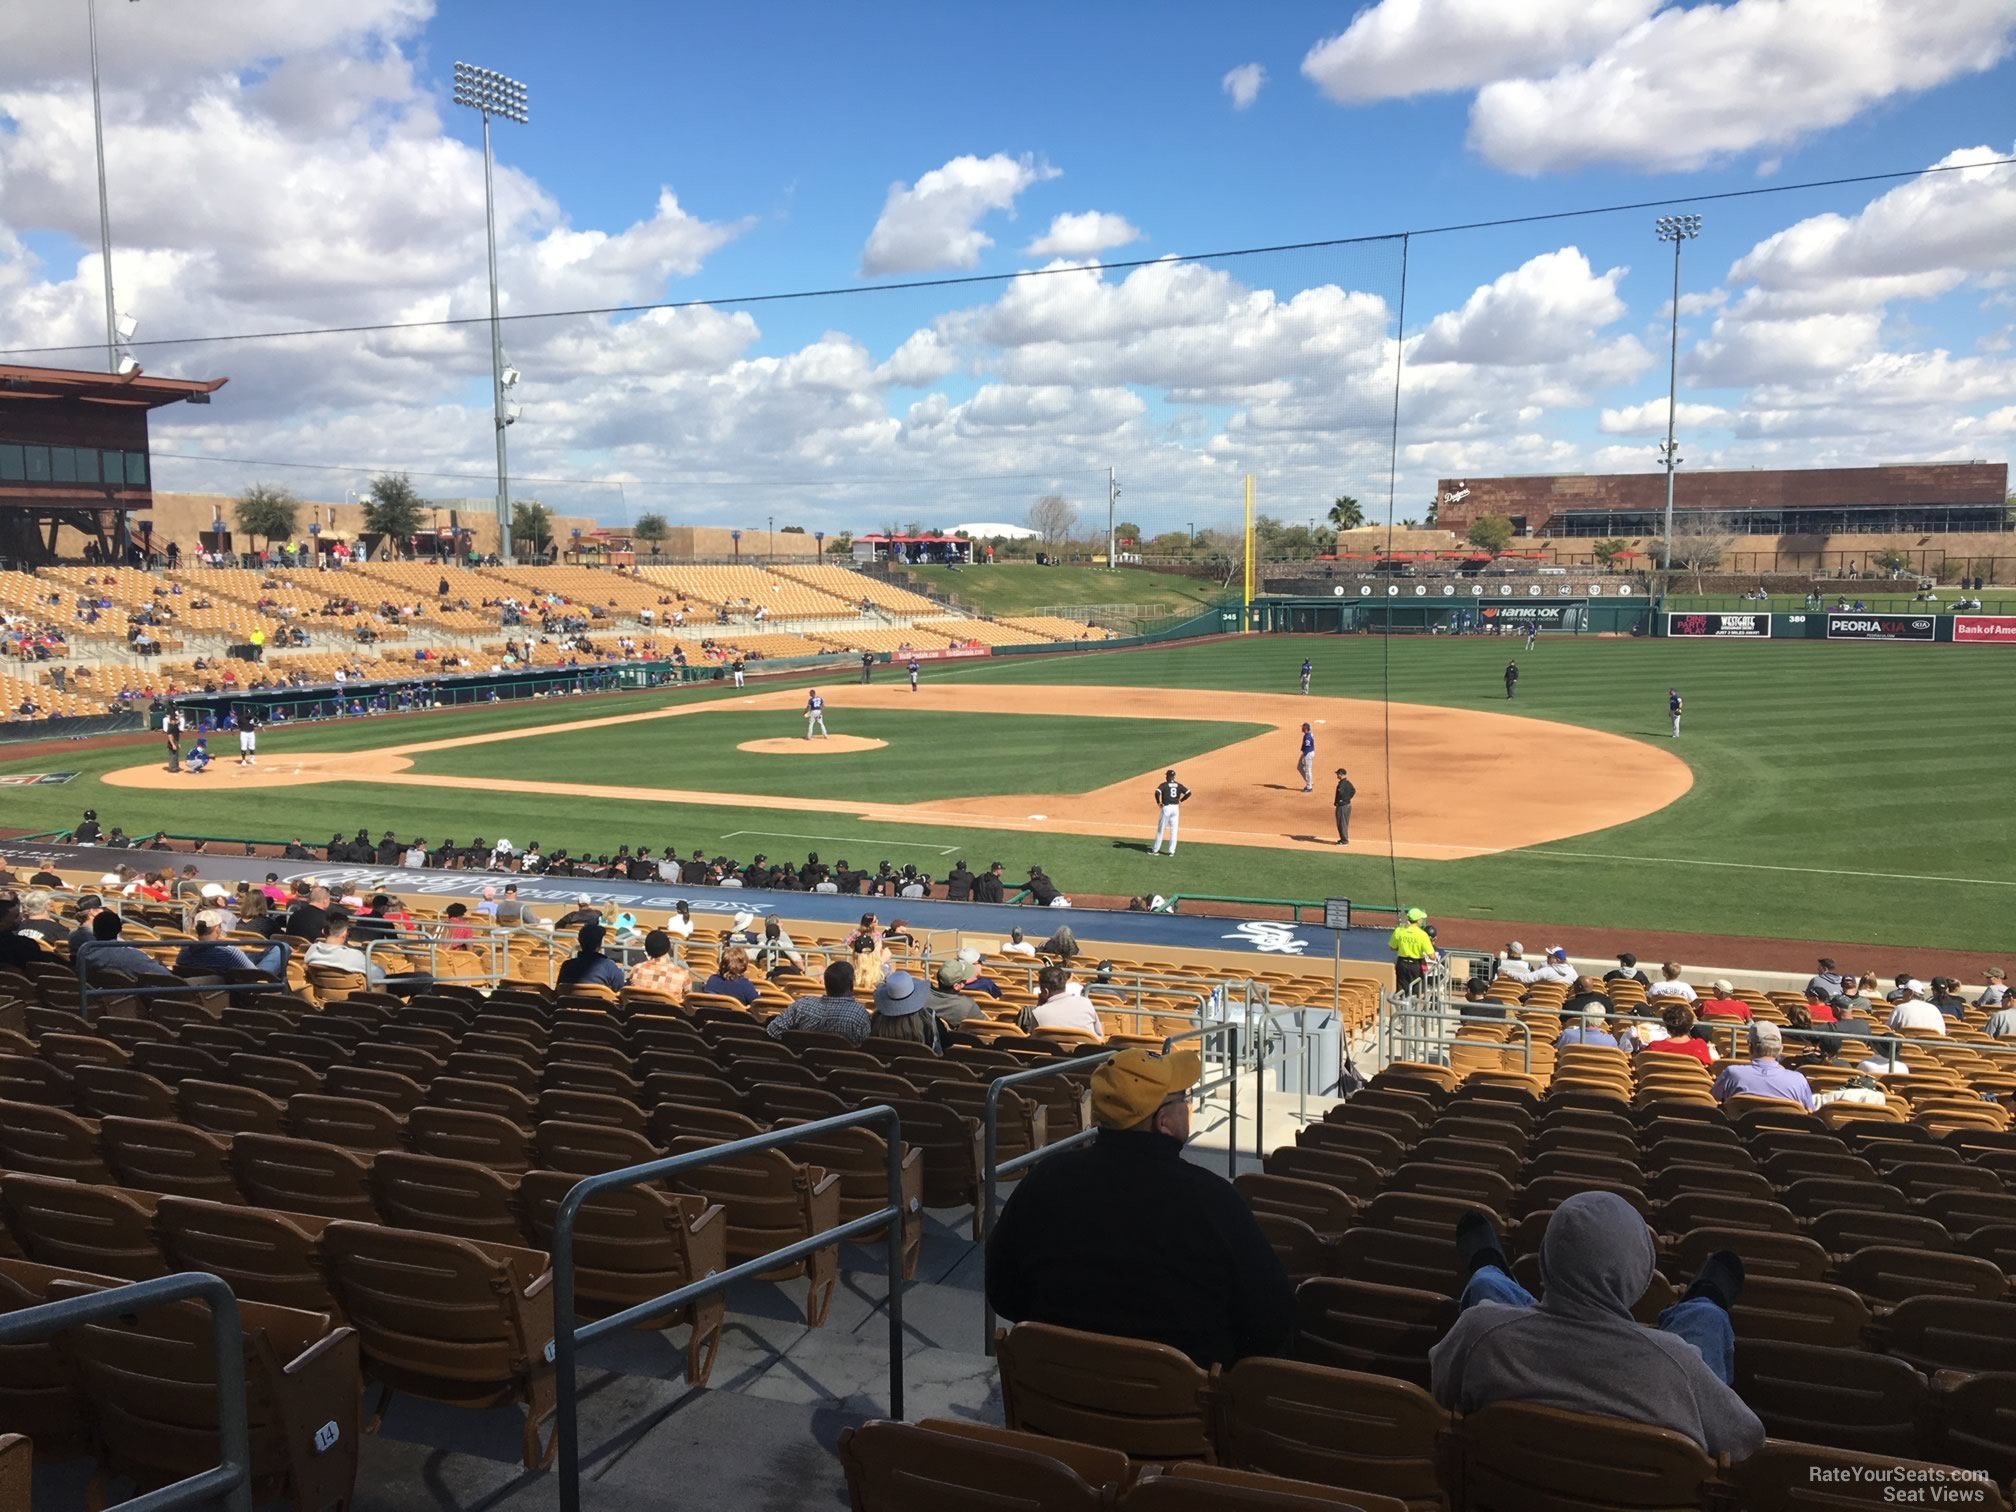 section 105, row 18 seat view  - camelback ranch